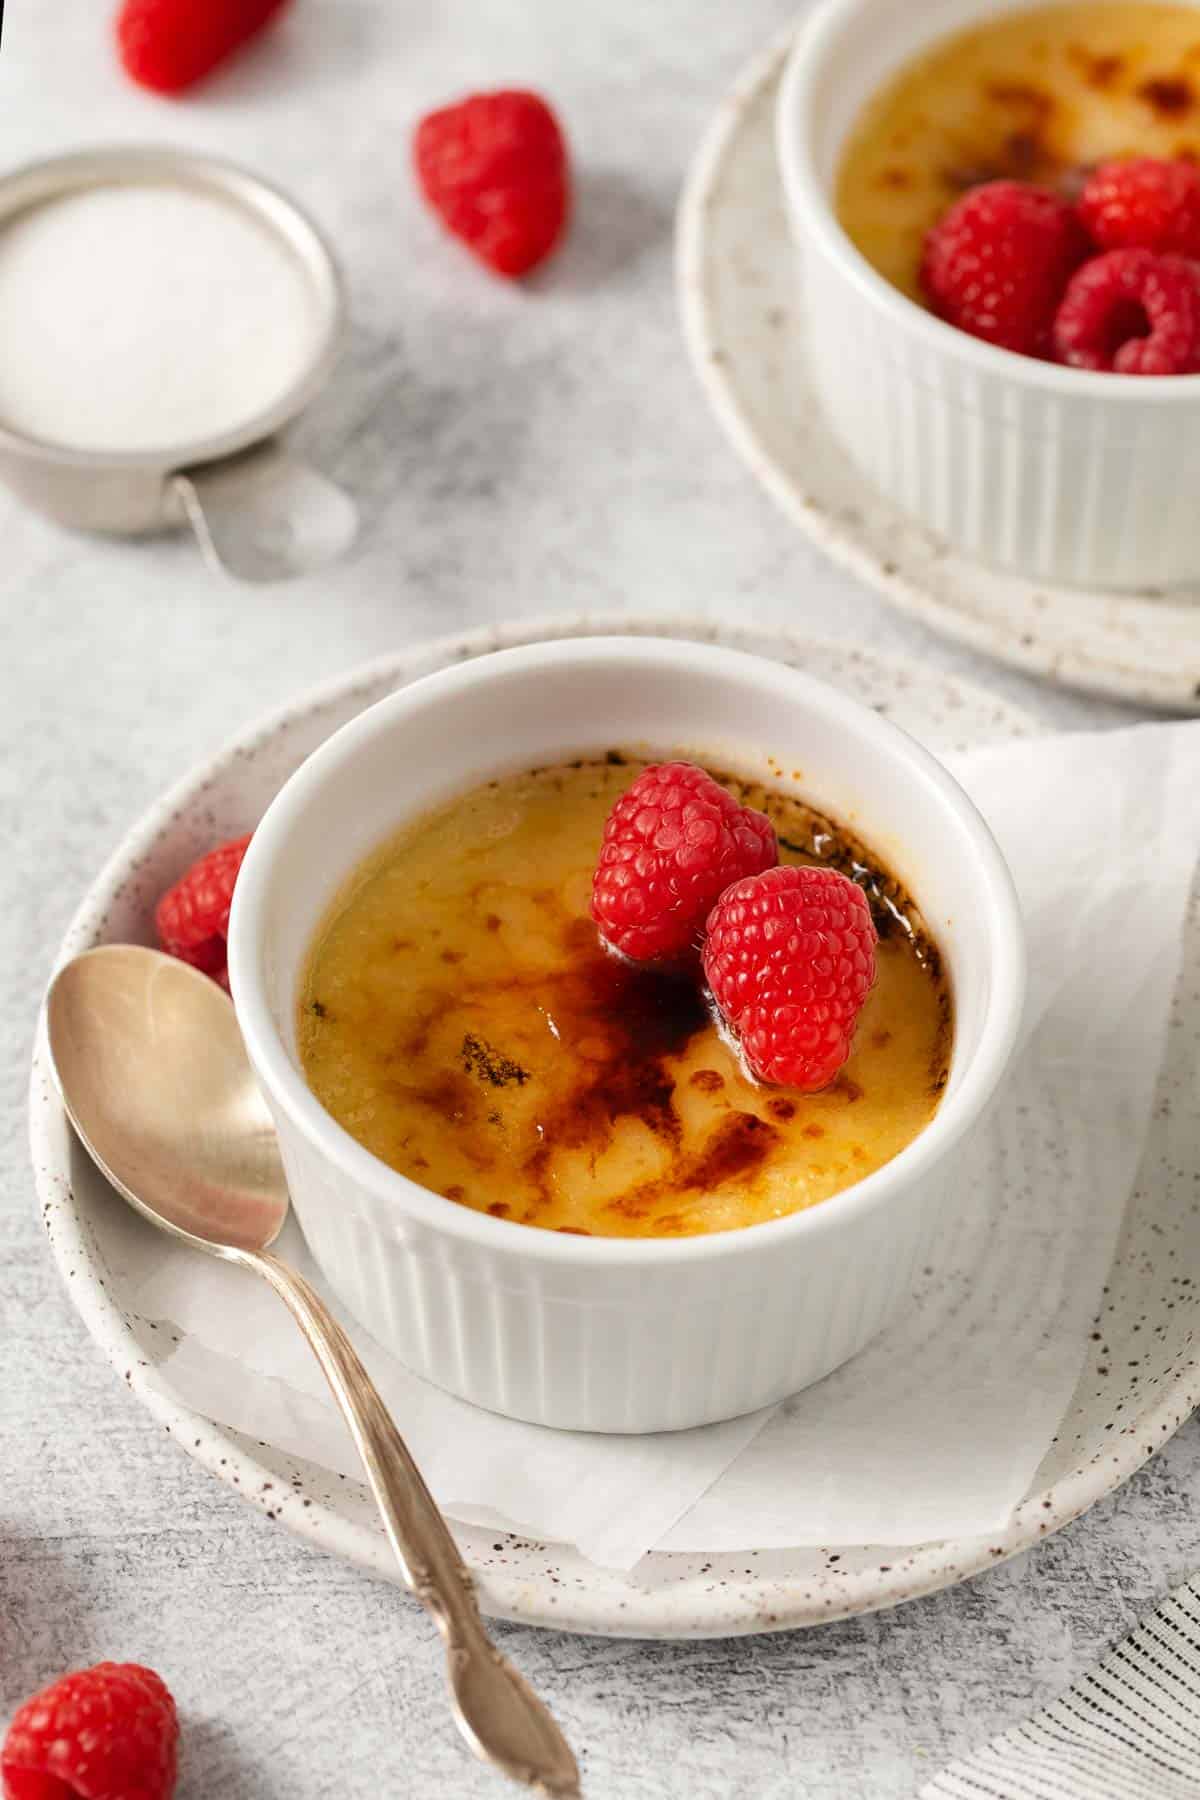 Dairy-free creme brulee in a ramekin, with raspberries on top and a spoon on the side